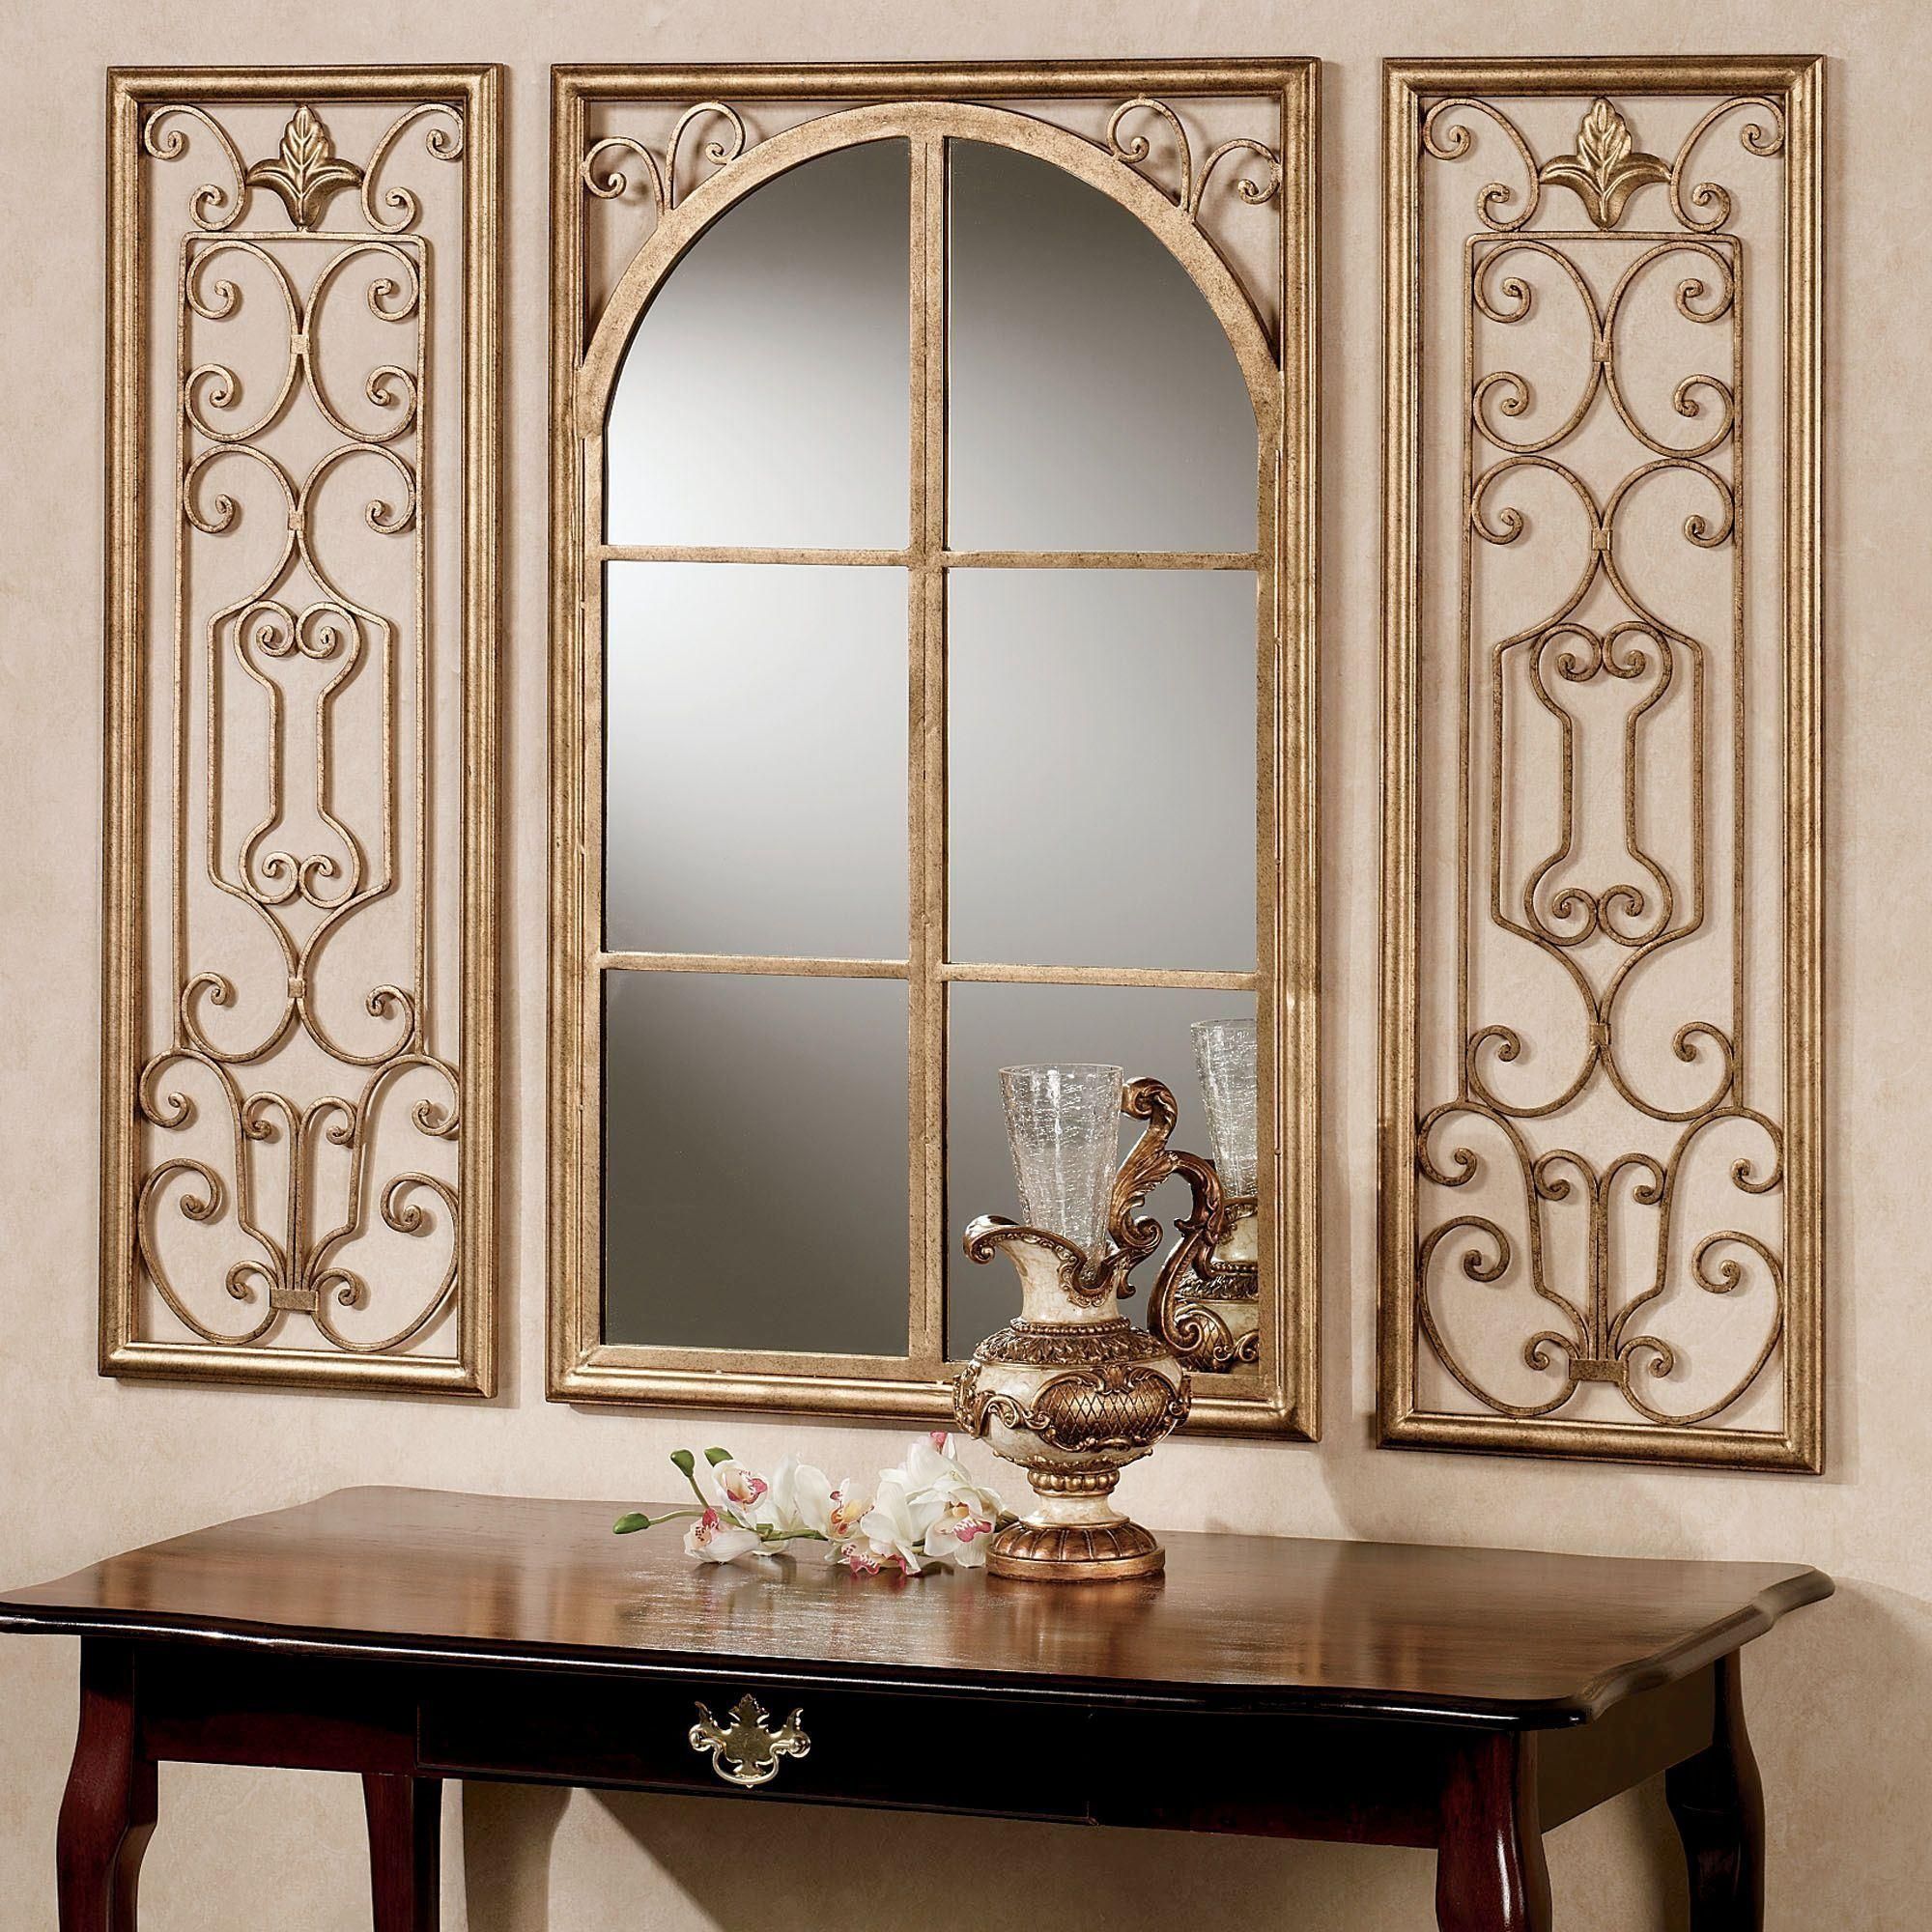 Provence Antique Gold Finish Wall Mirror Set Within Mirrors Decoration On The Wall (View 14 of 20)